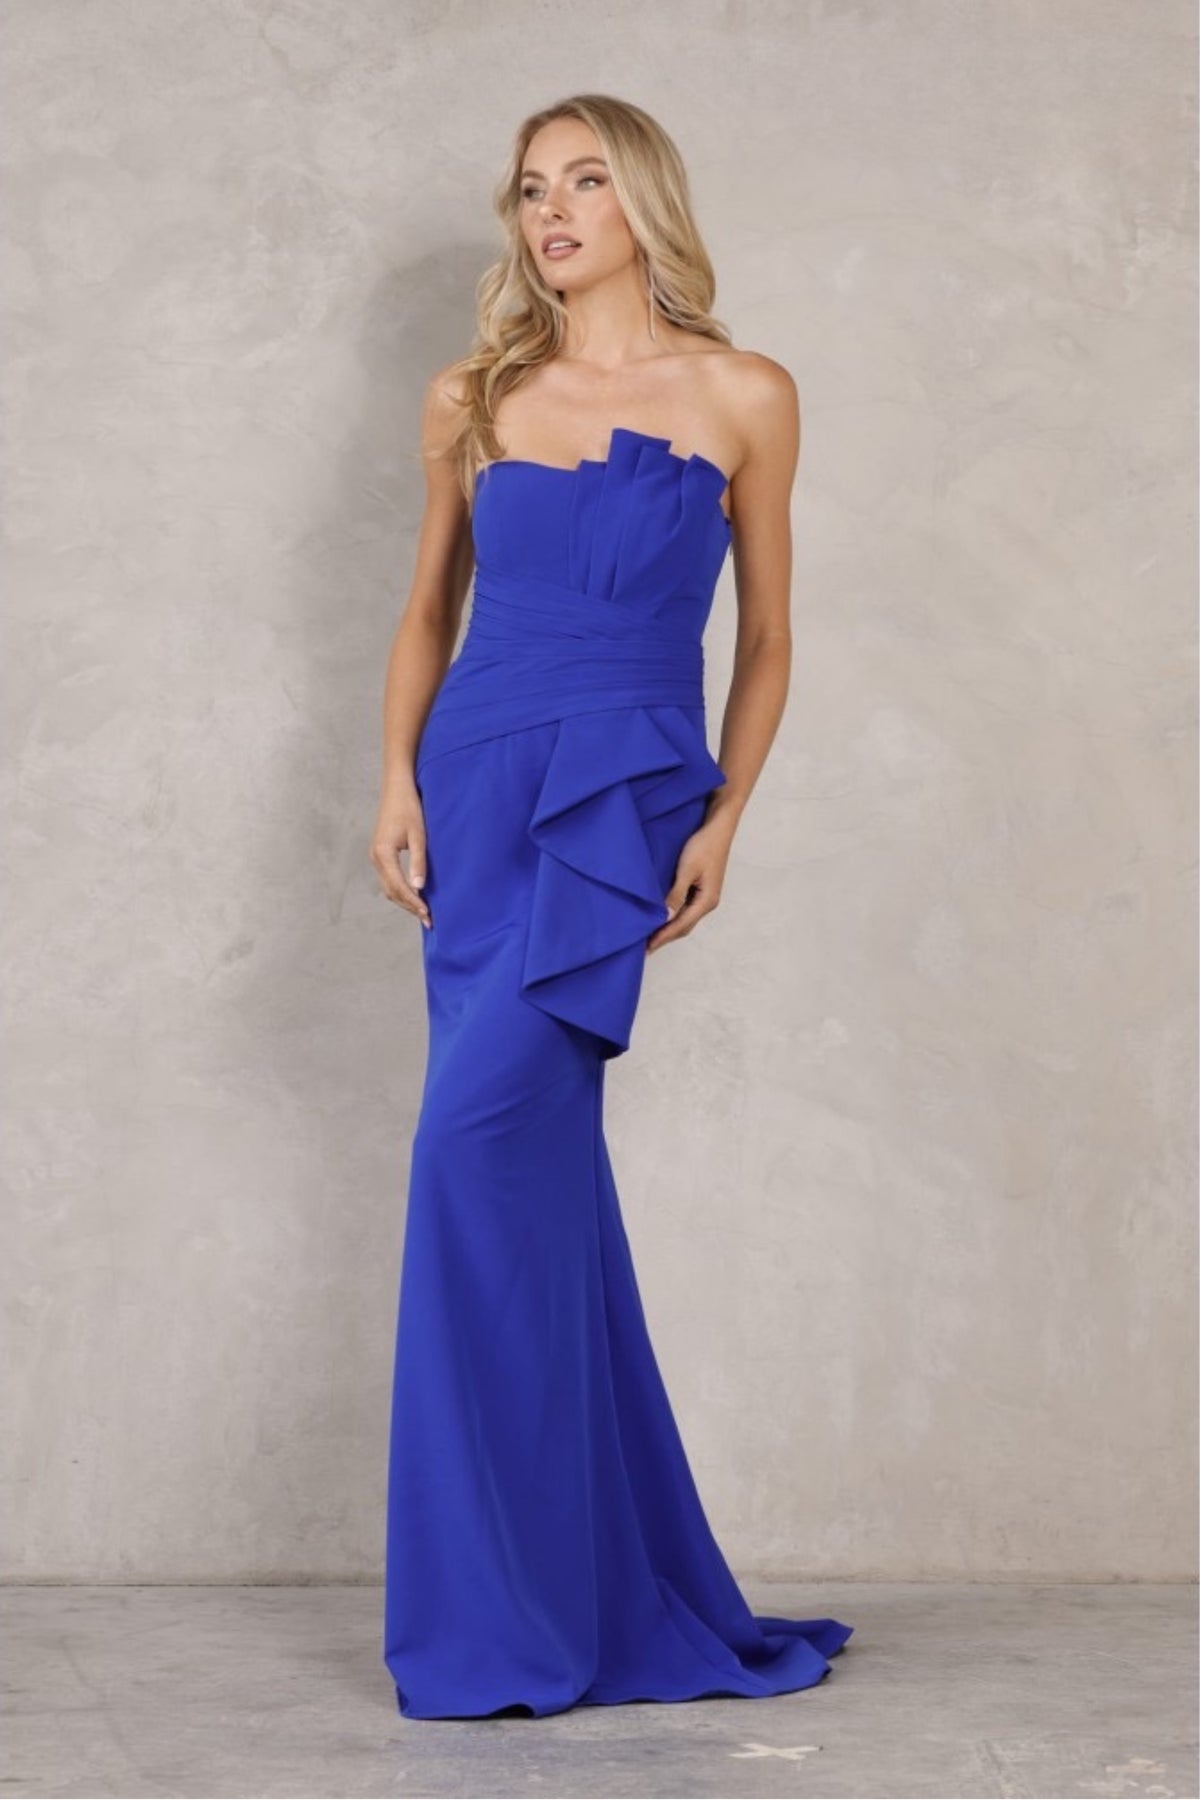 Terani 2214E0165 Strapless Peplum Evening Dress, elegant gown in 2-way stretch satin, perfect for evening events and mother of the bride occasions.